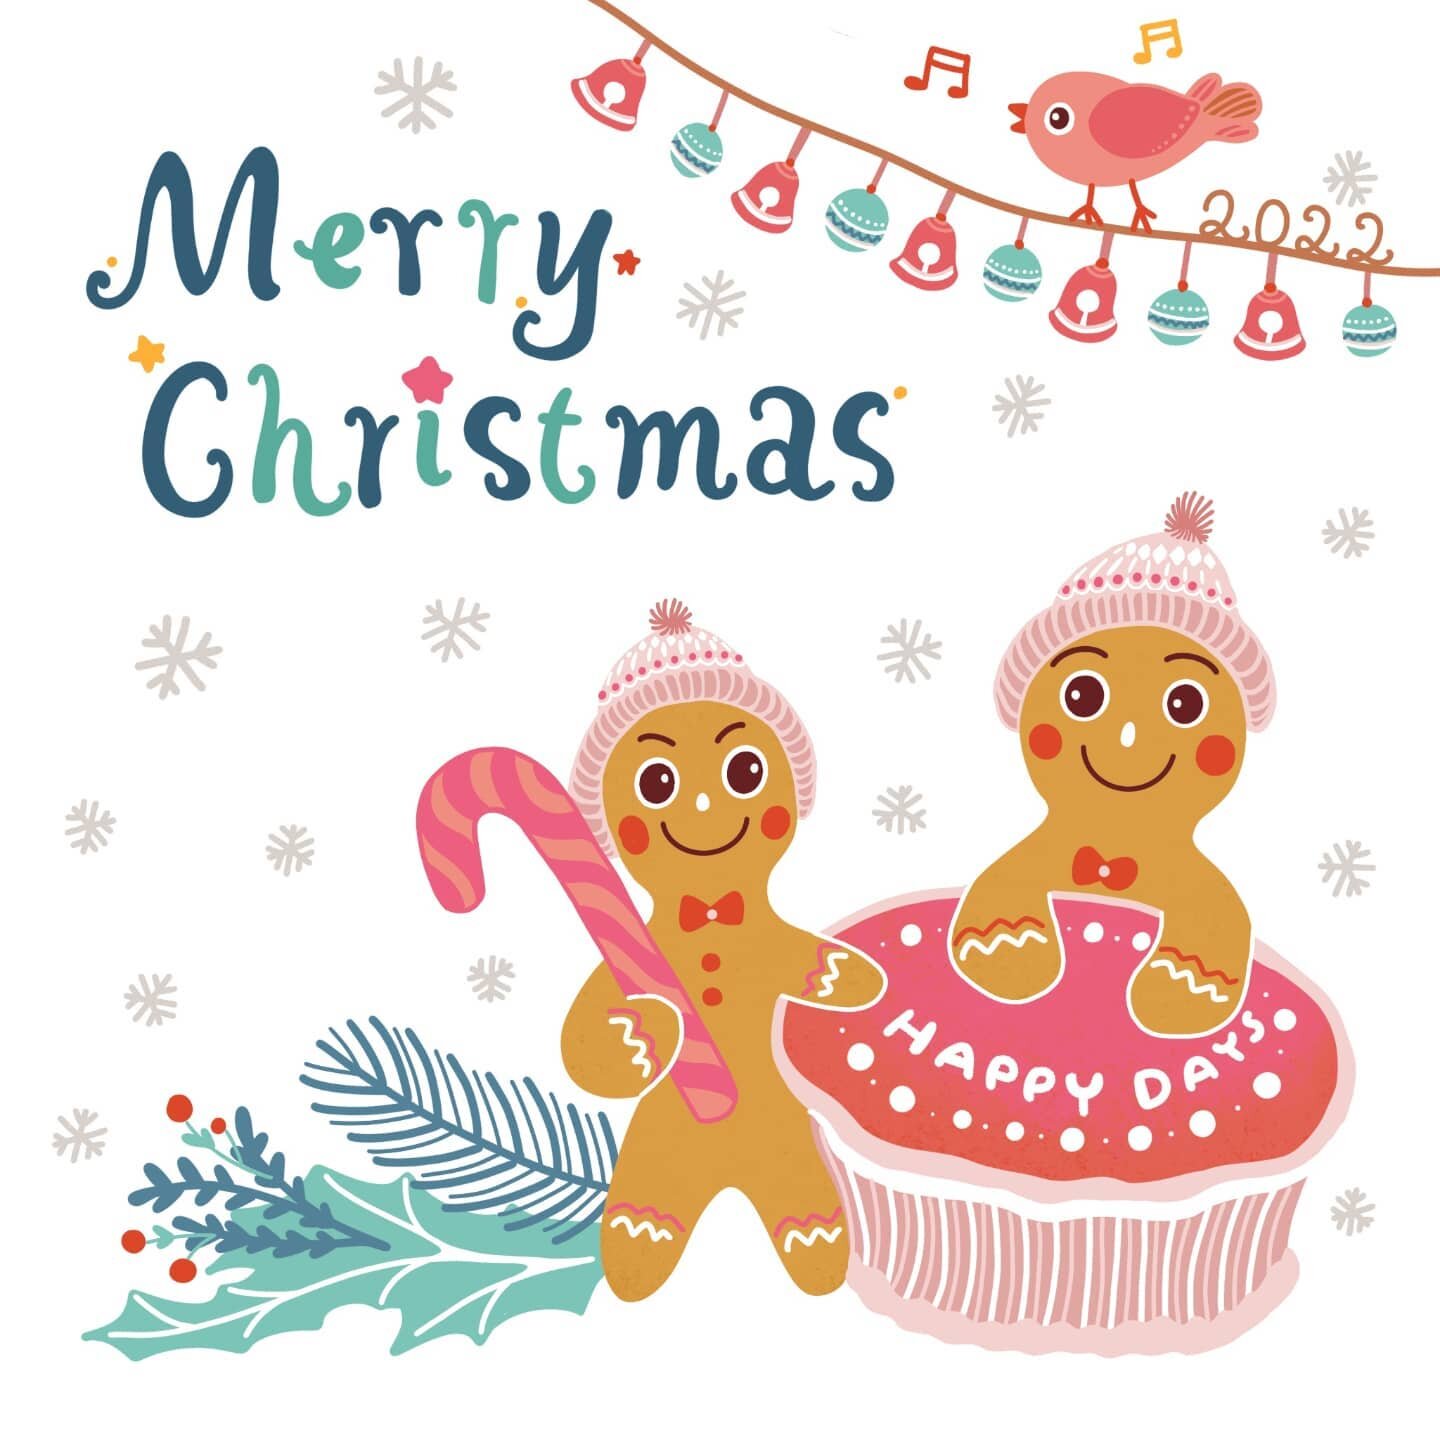 Merry Christmas!
😘🌺😍

#merrychristmas #newyear #2022 #illustrations #happy#christmasdecorations #christmas #childrensillustration

@pterlip @andreabrownlit